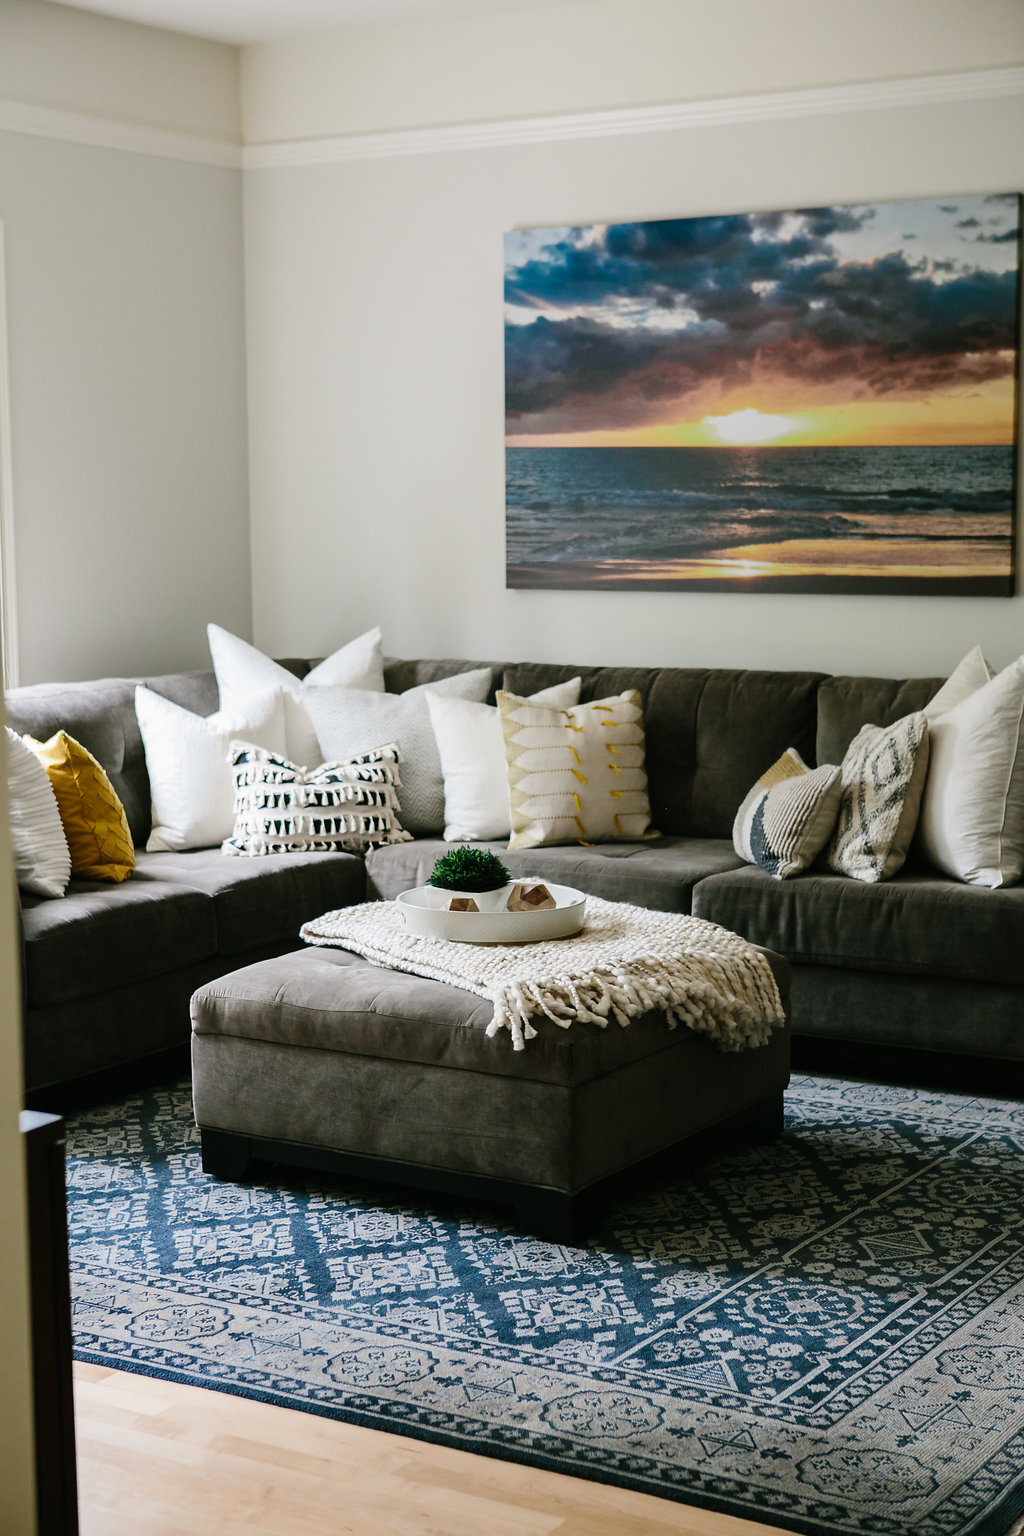 Tips for arranging decorative pillows on a sofa - The Washington Post